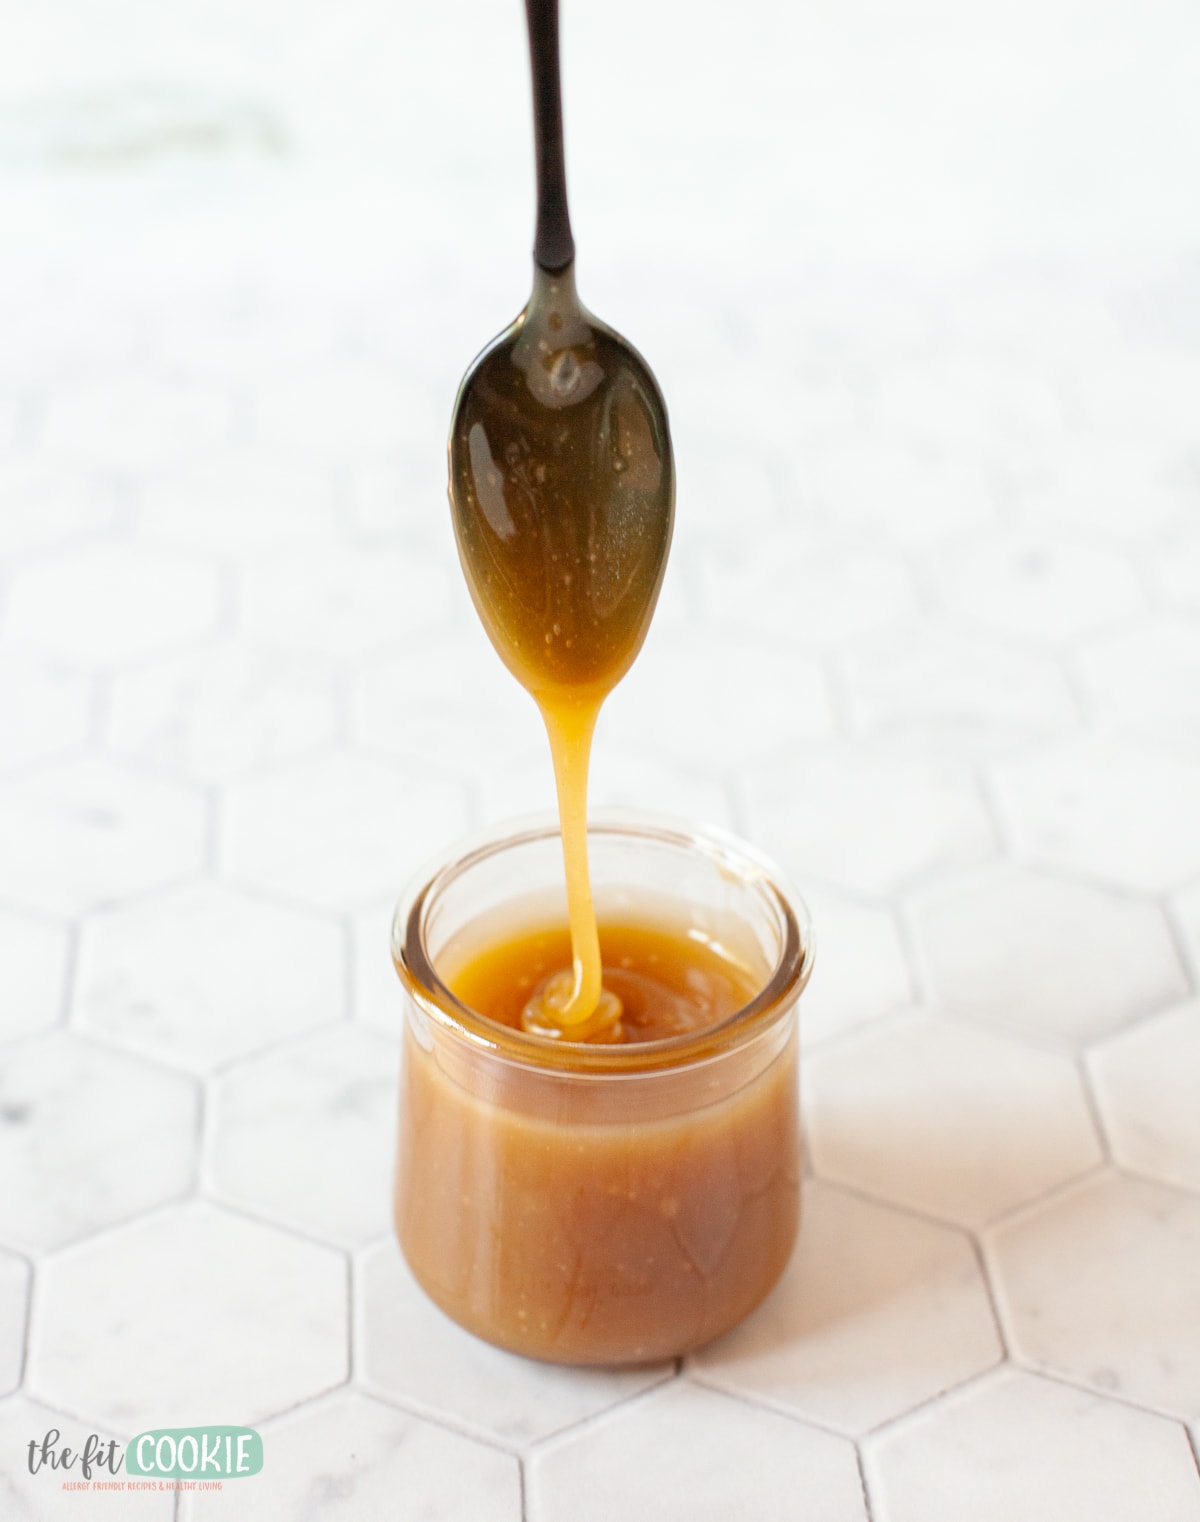 spoon drizzling easy caramel sauce into a small cup